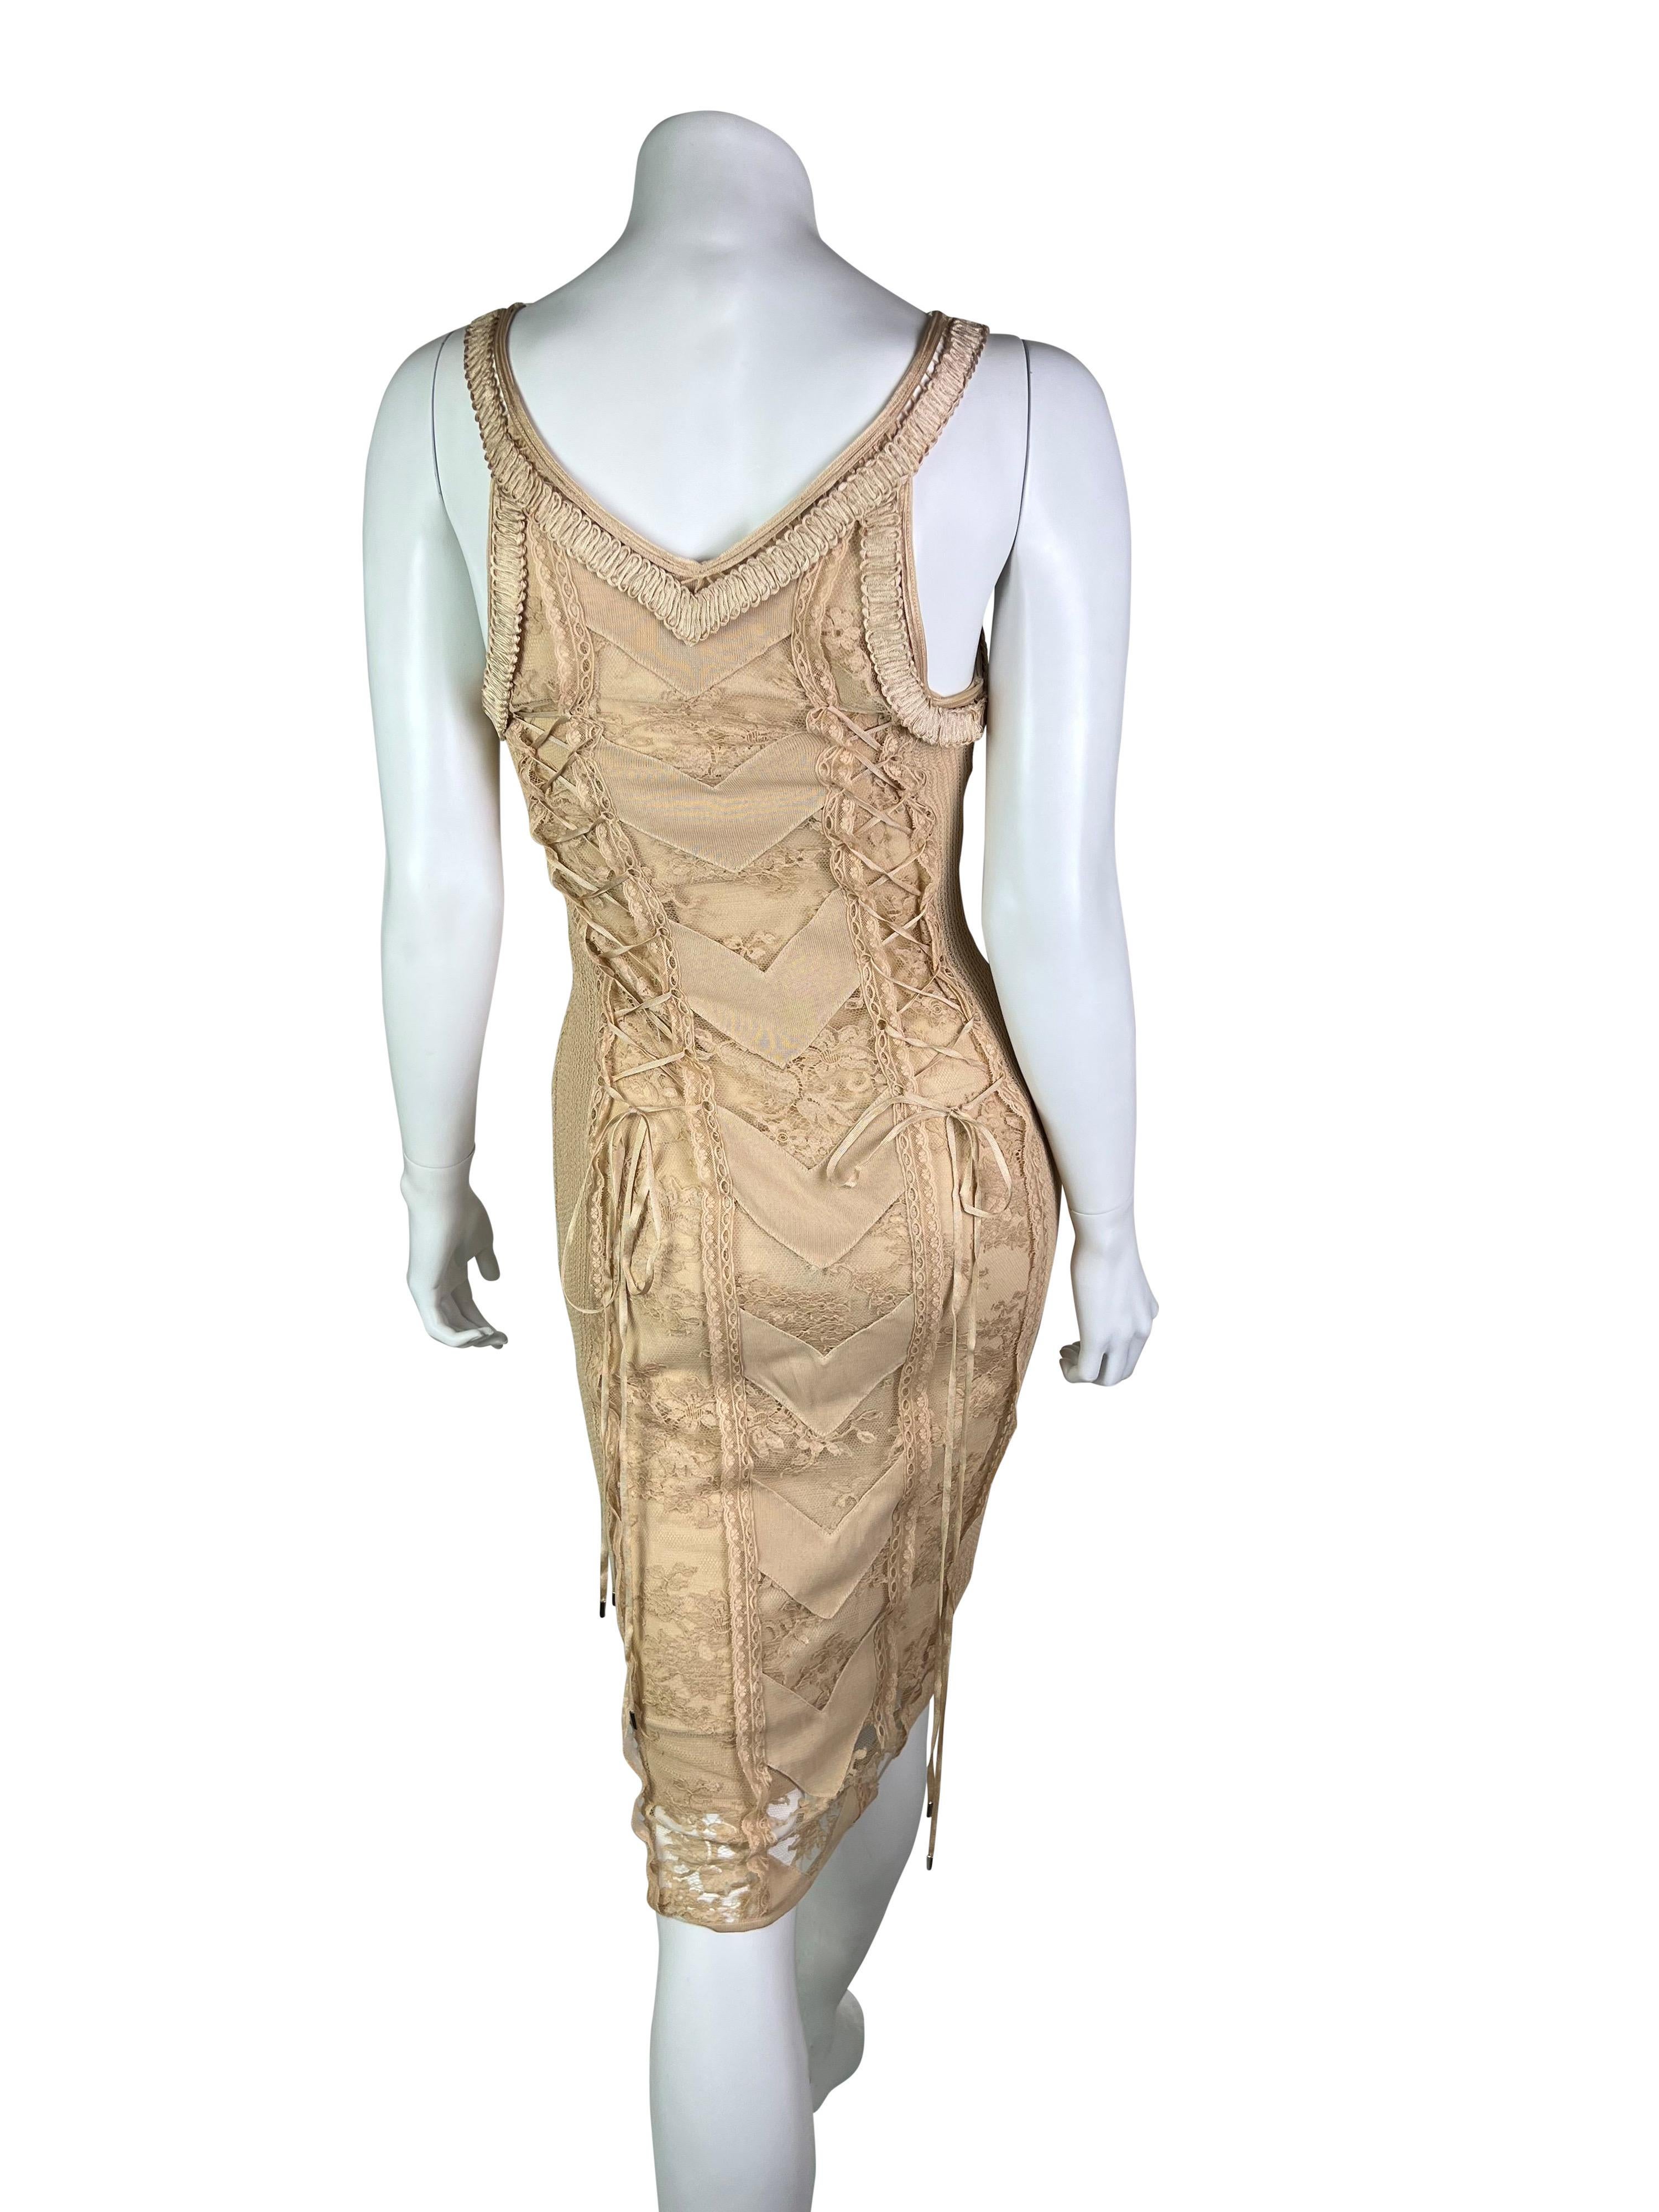 Dior By John Galliano Spring 2006 Lace Dress In Excellent Condition For Sale In Prague, CZ